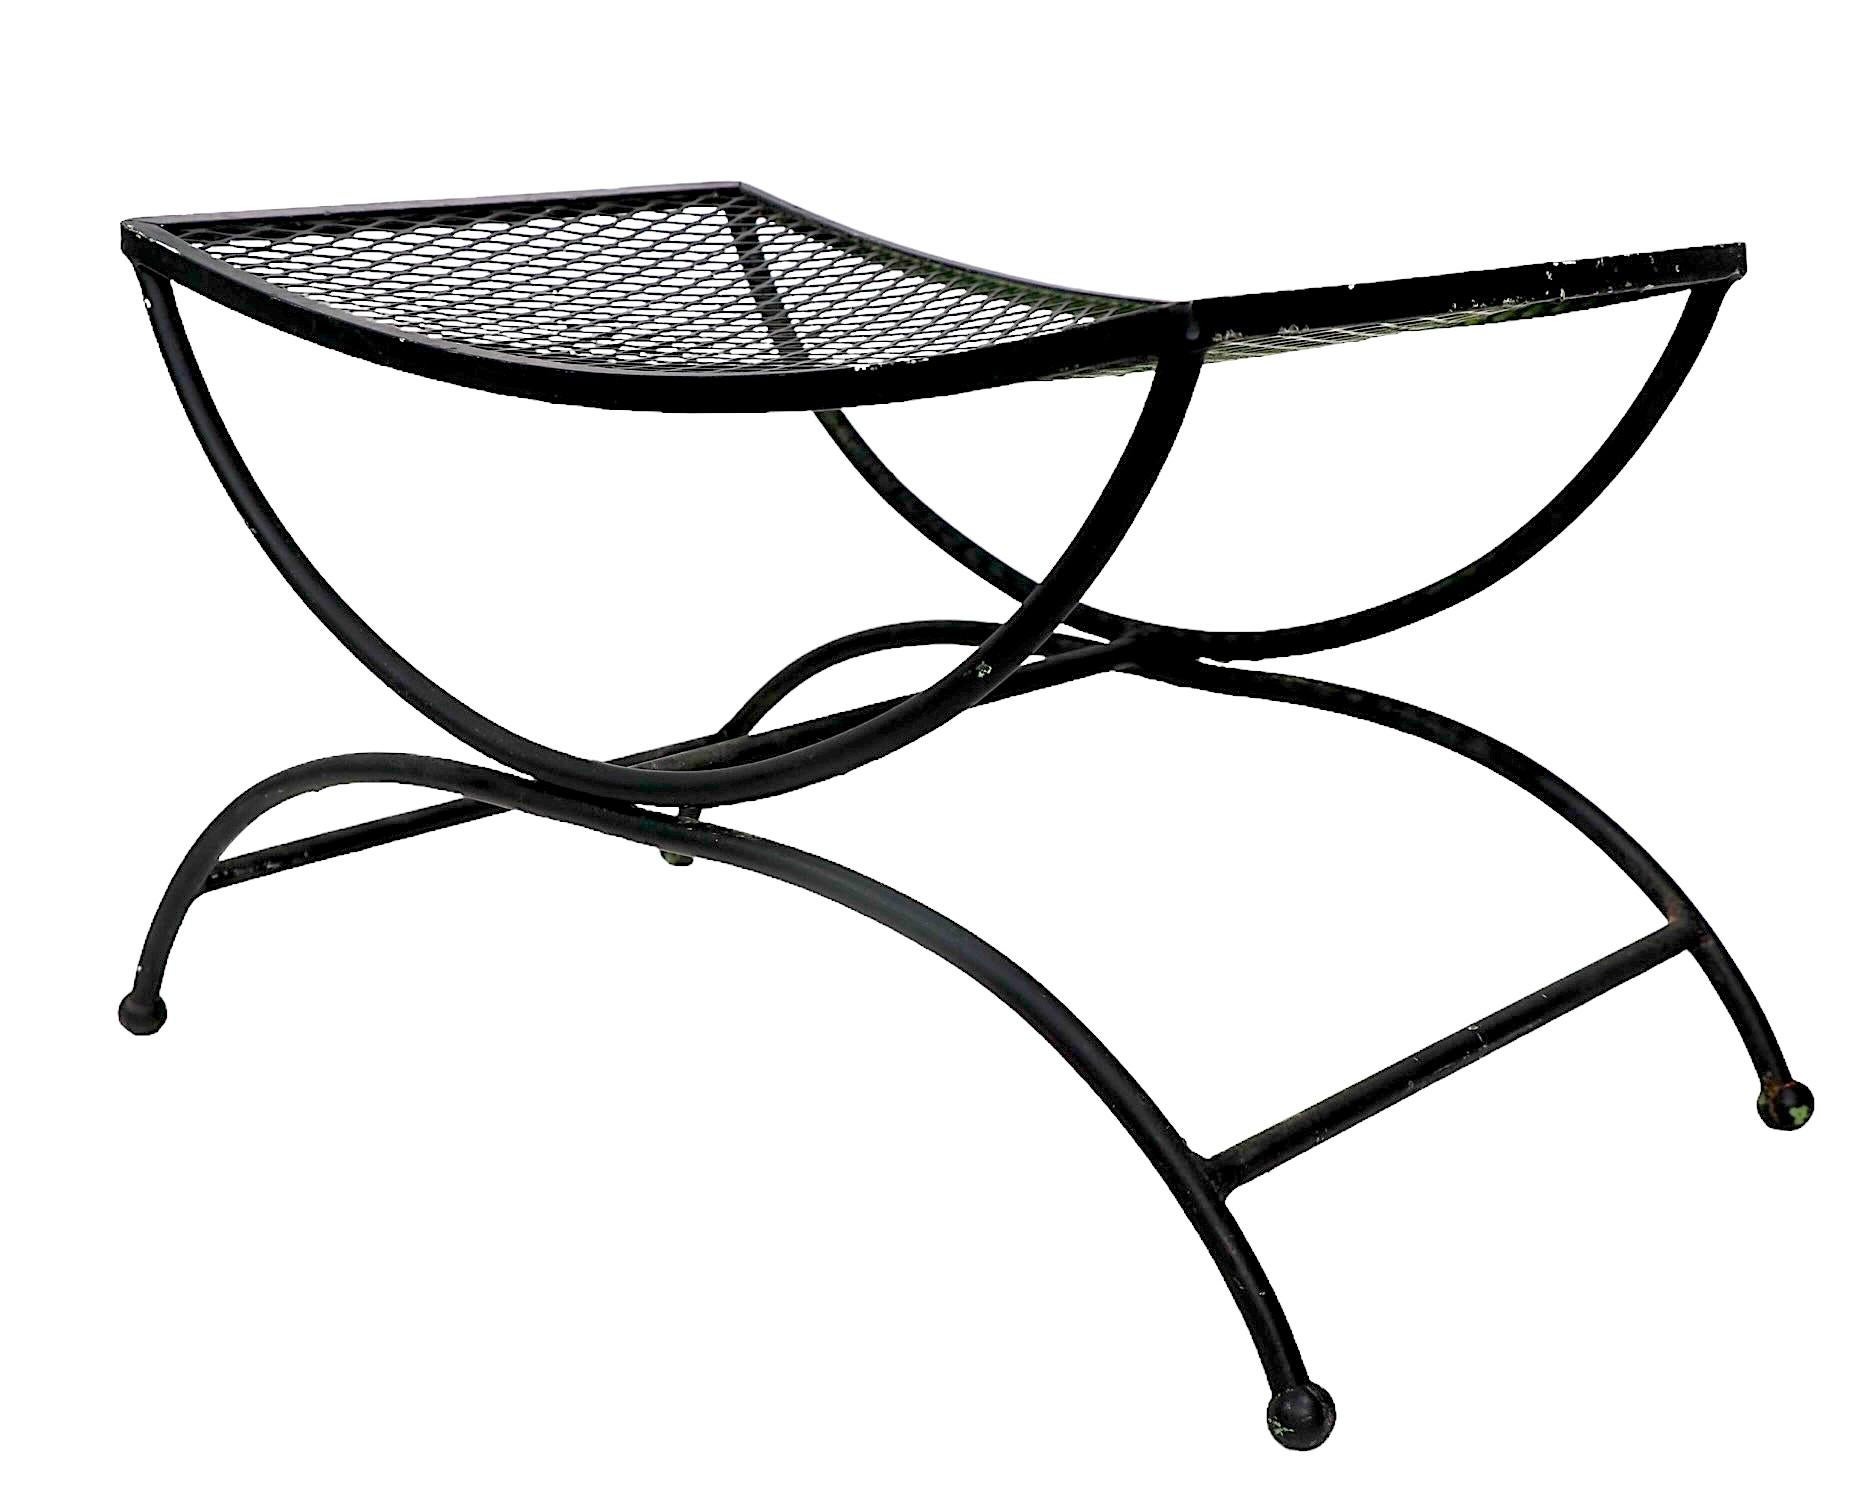 Mid-Century Modern Wrought Iron Saddle Seat Ottoman Bench by Woodard  For Sale